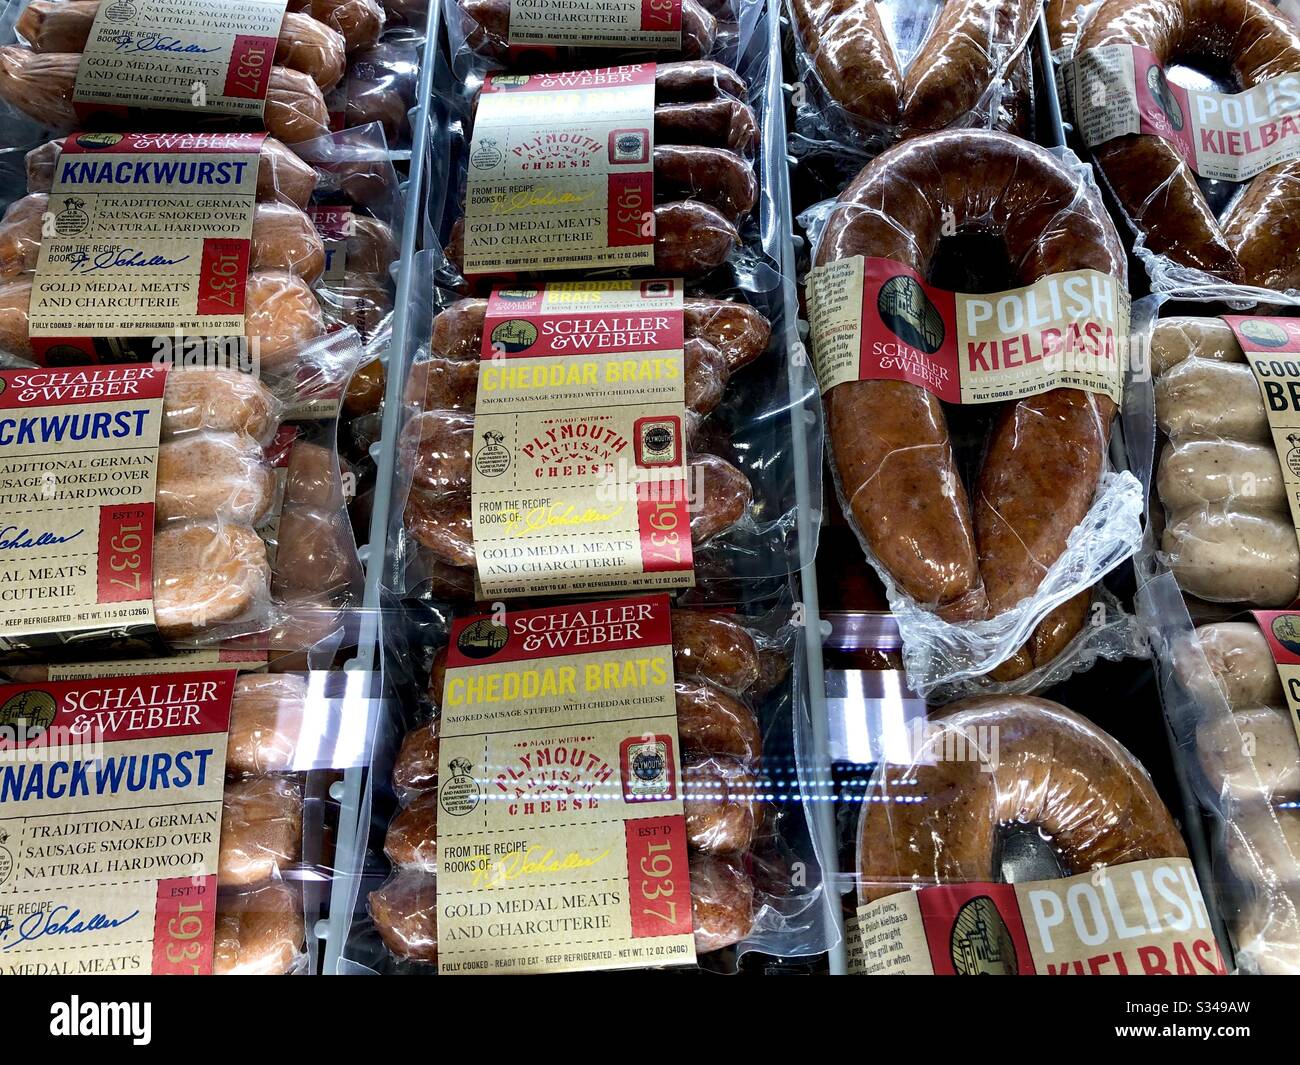 A variety of sausage meats at an organic market called The Wild Fork. Stock Photo